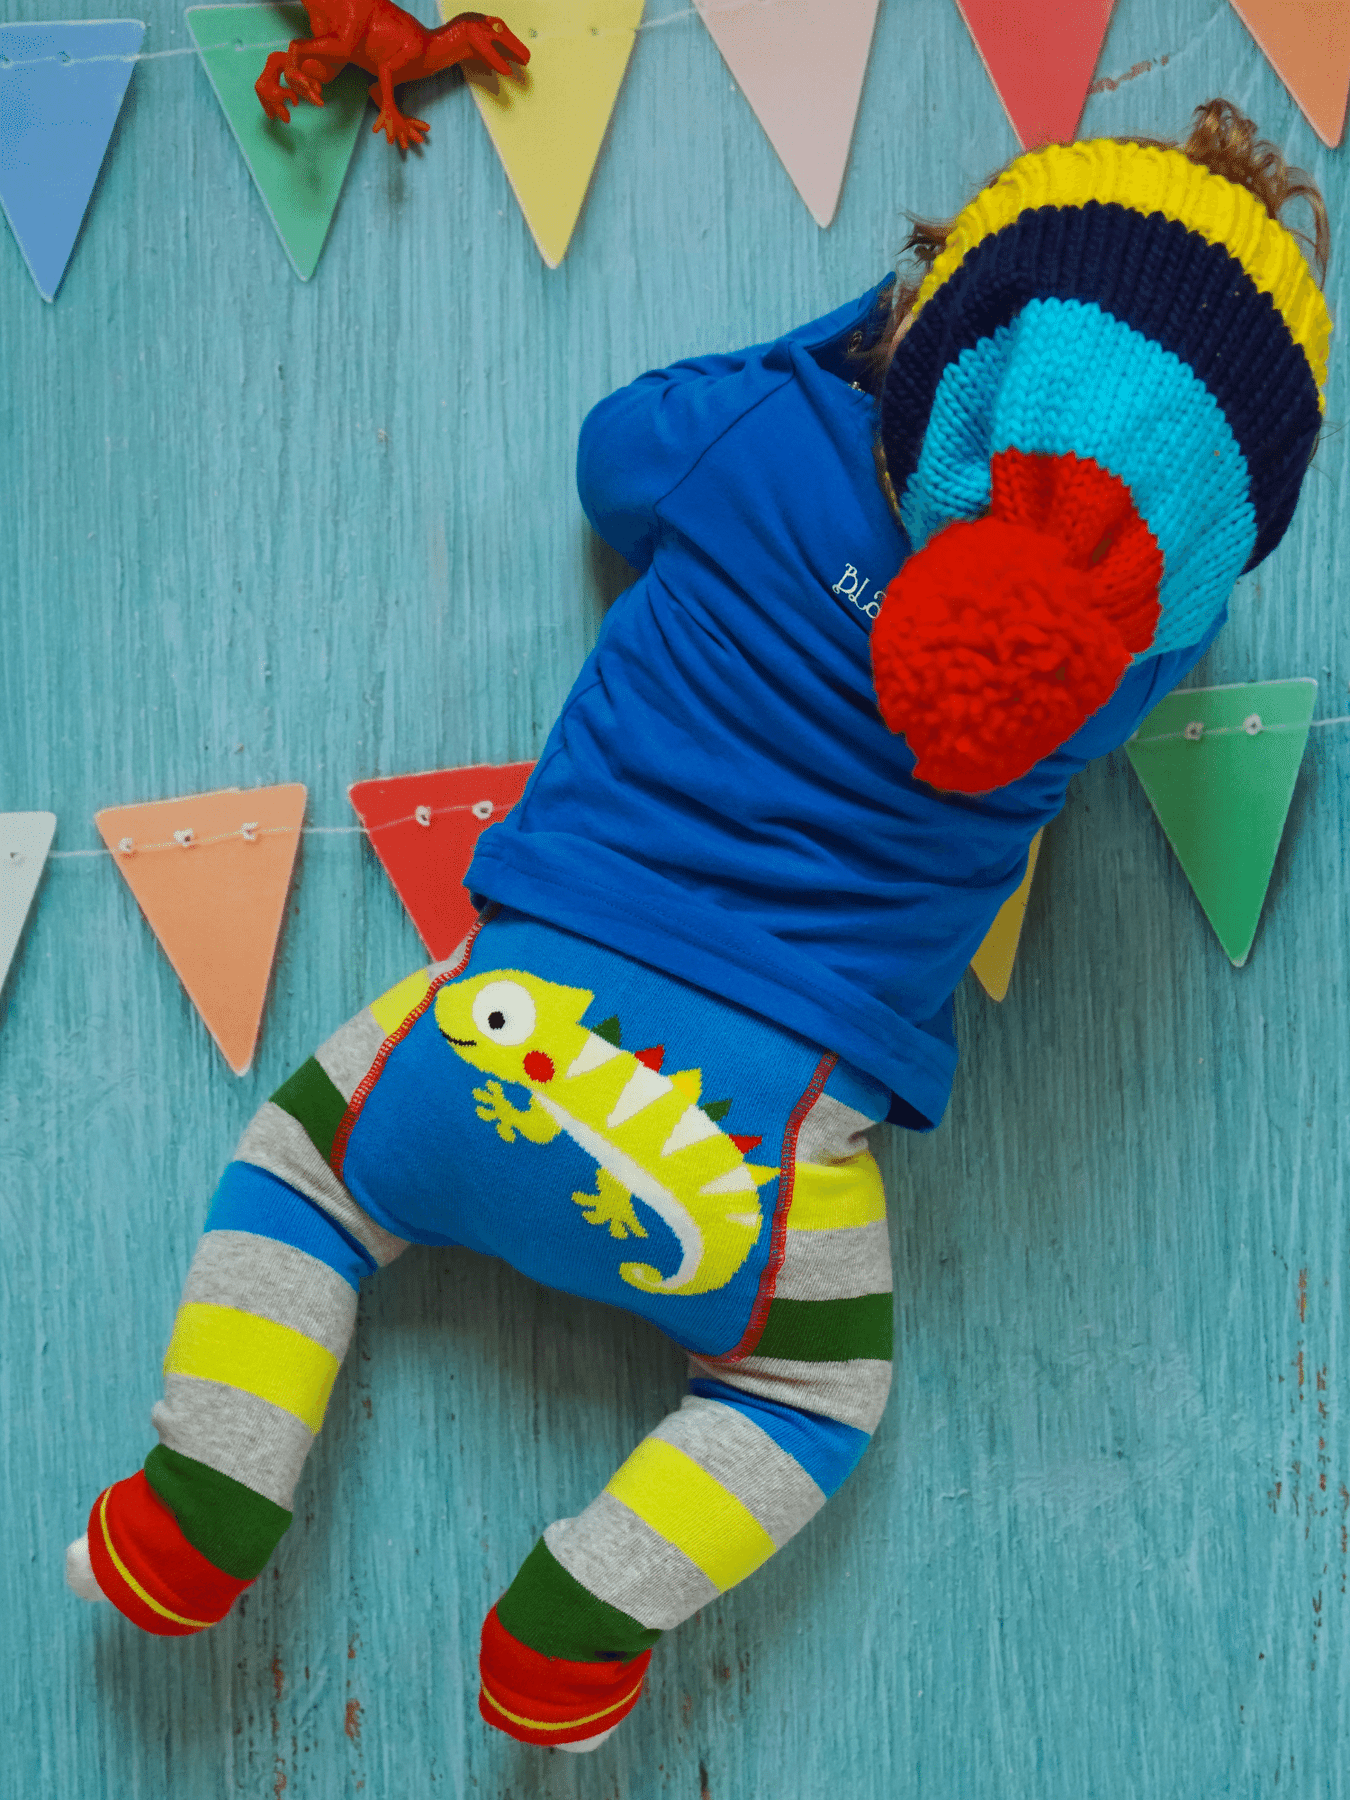 Image shows cute baby leggings with chameleon design on the bum.